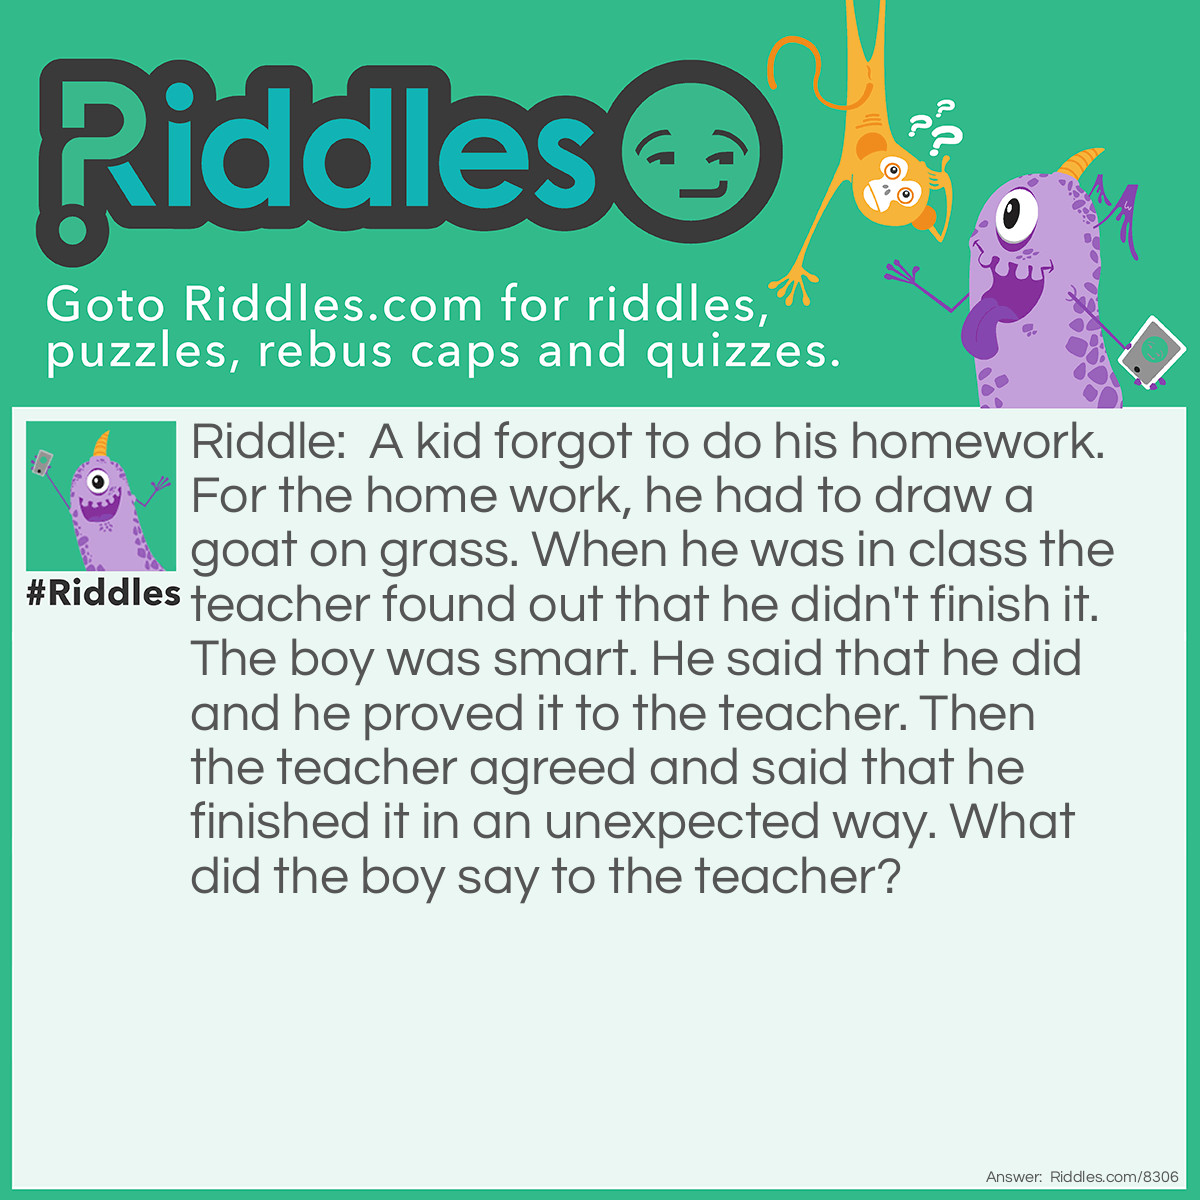 Riddle: A kid forgot to do his homework. For the home work, he had to draw a goat on grass. When he was in class the teacher found out that he didn't finish it. The boy was smart. He said that he did and he proved it to the teacher. Then the teacher agreed and said that he finished it in an unexpected way. What did the boy say to the teacher? Answer: He said: I finished it. You see, there is a goat. Goats eat grass so the goat in my picture ate the grass. Now the grass is gone. But since there is no more grass left, the goat went somewhere else to find more grass to eat. That’s why the homework is blank.